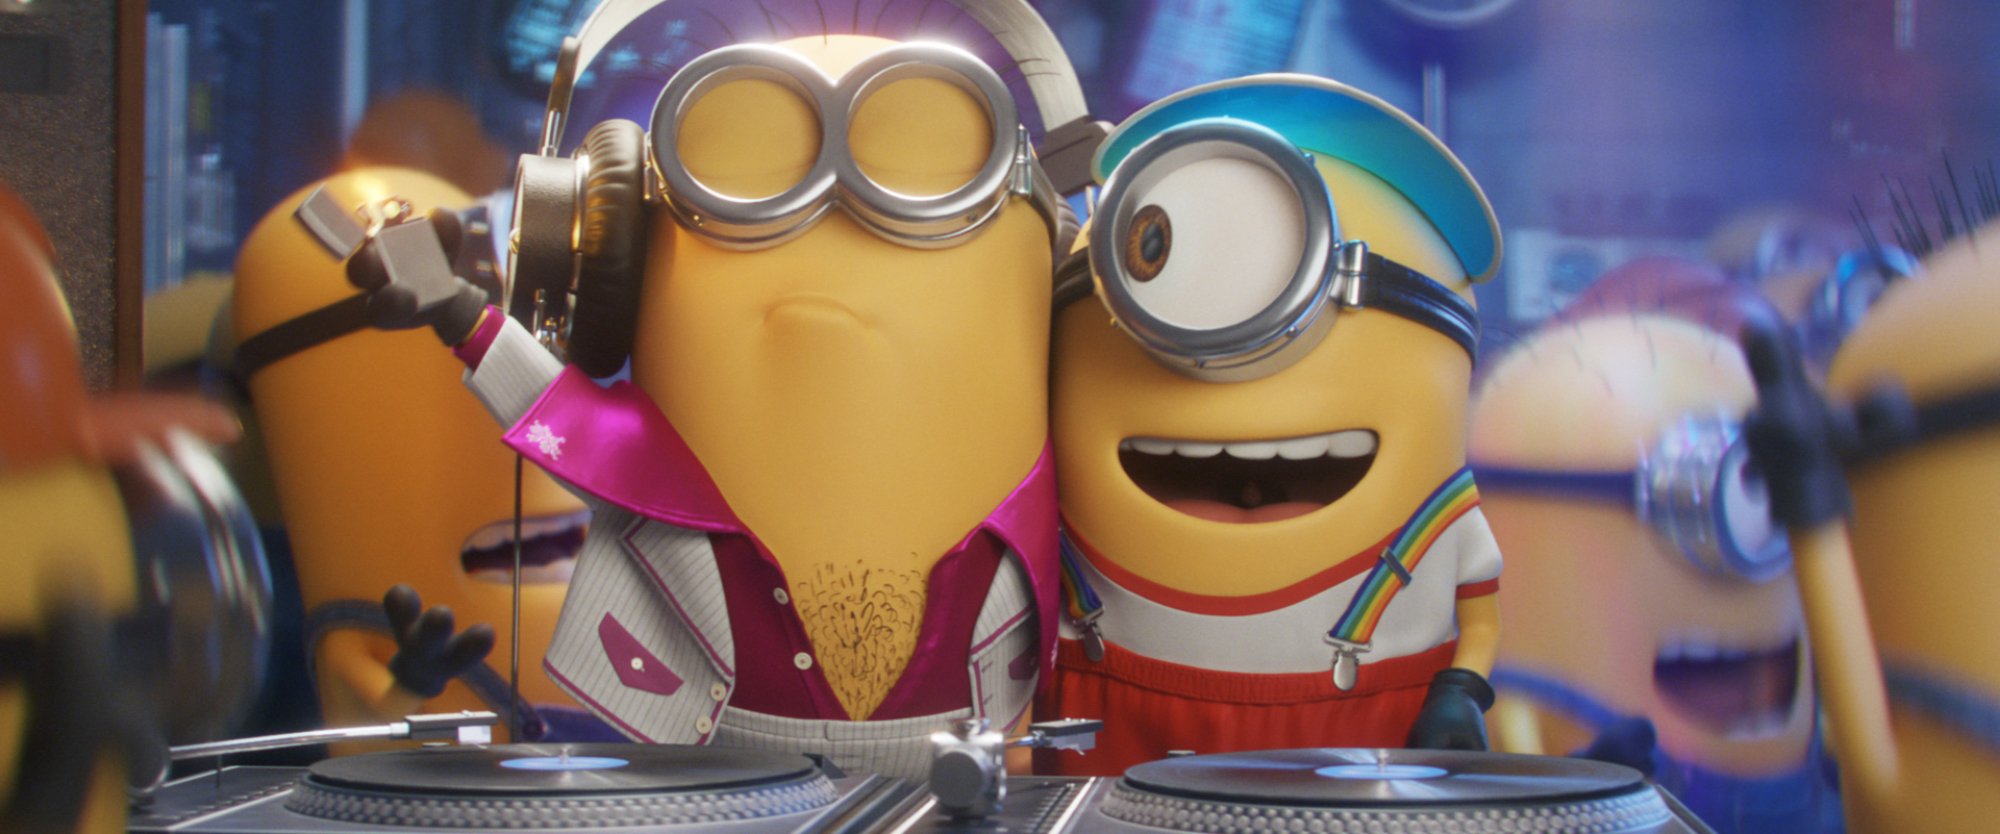 https://www.cheatsheet.com/wp-content/uploads/2022/07/Minions_-The-Rise-of-Gru-minions-watch-one-another-by-the-DJ-booth.jpg